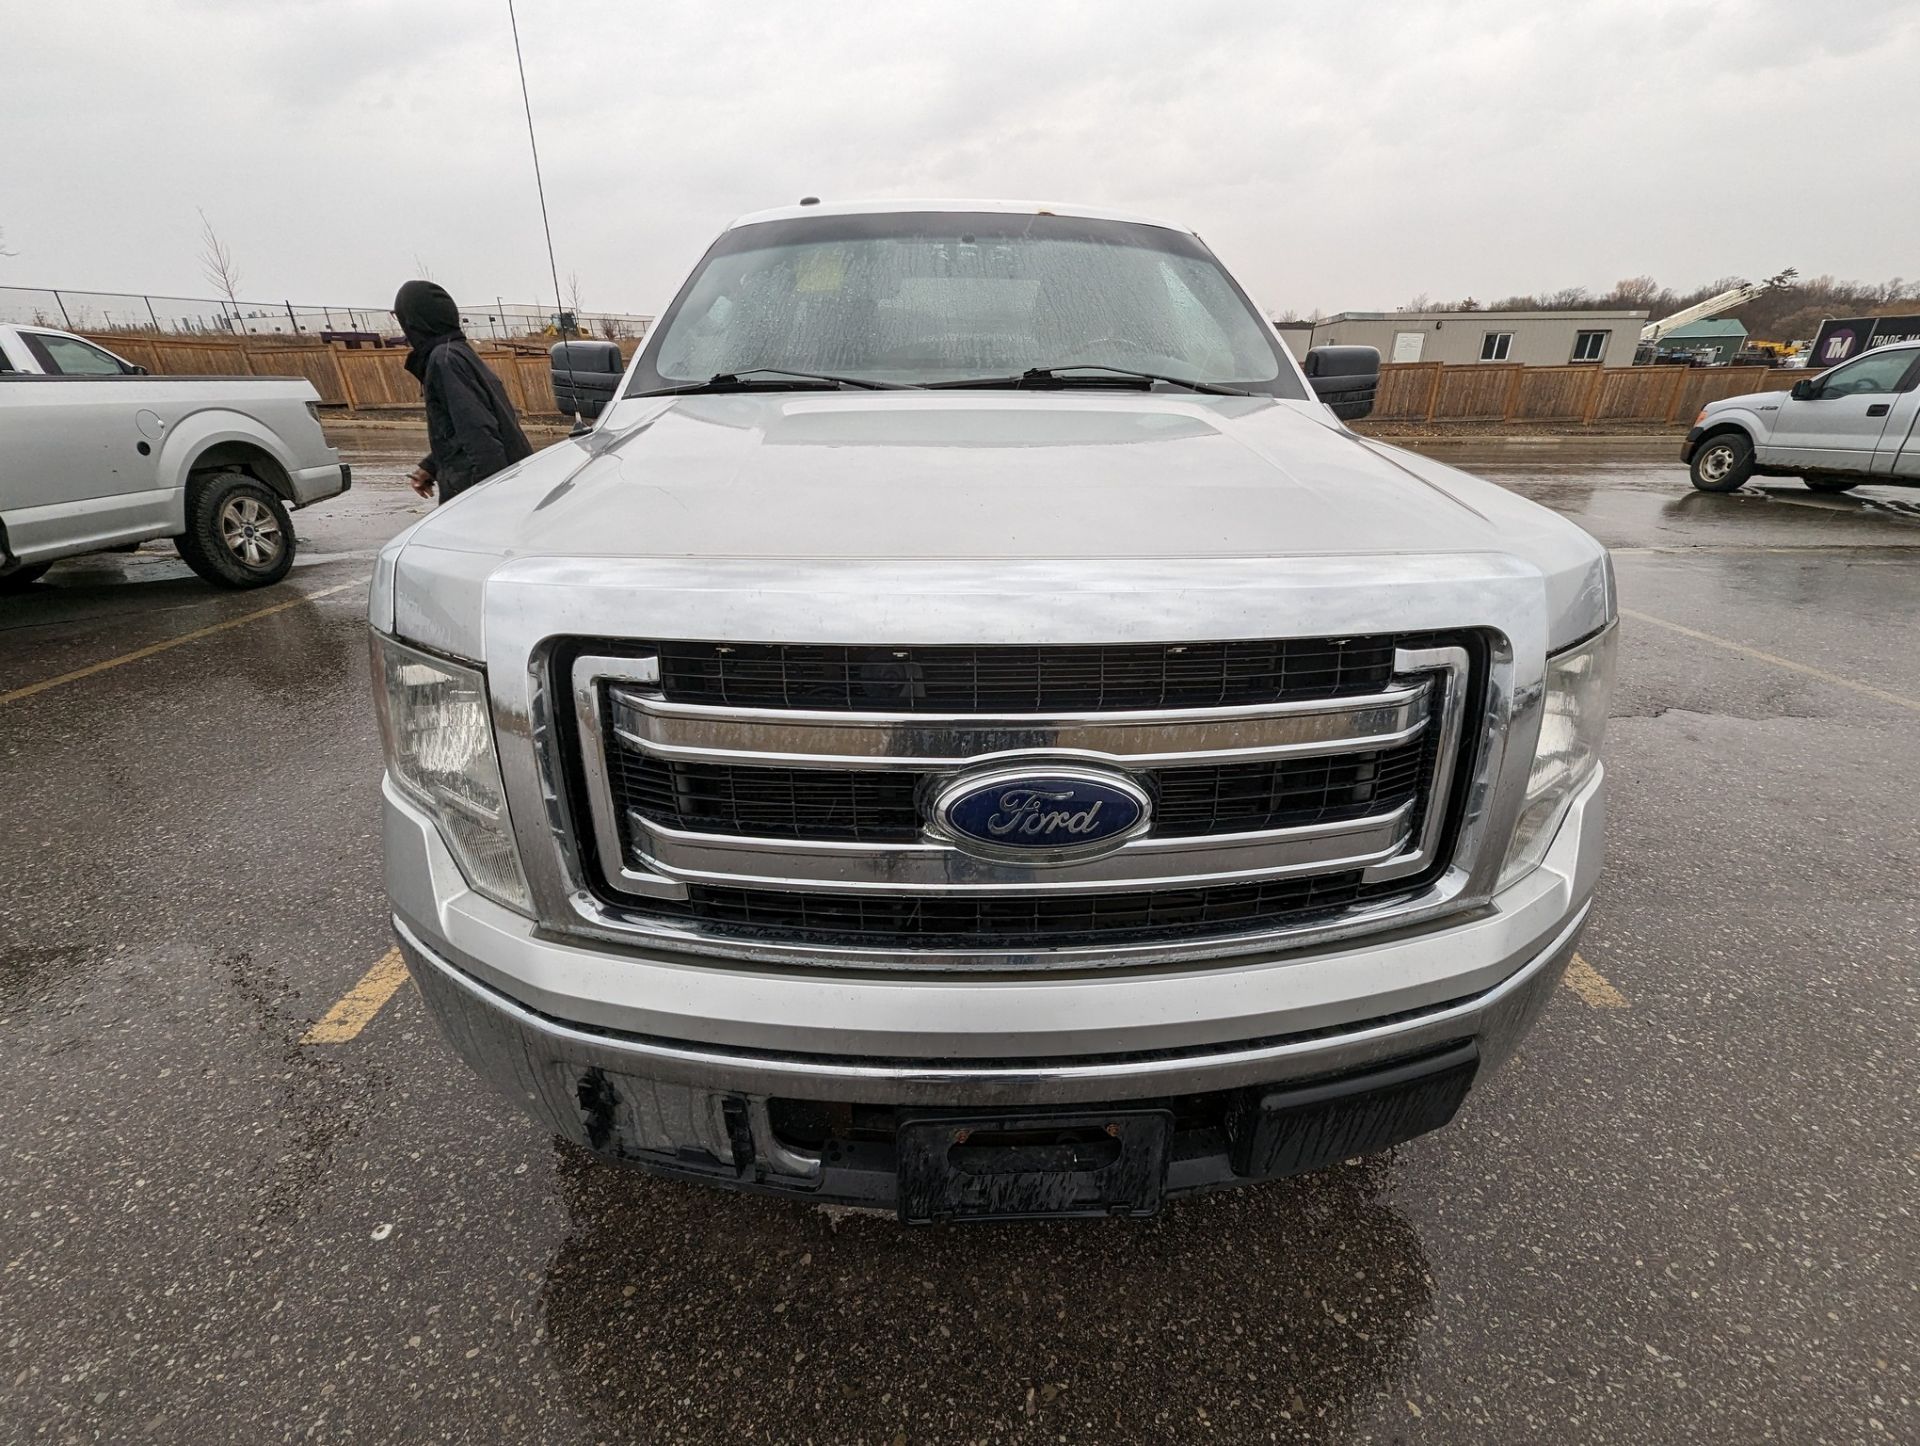 2013 FORD F150 XLT PICKUP TRUCK, VIN# 1FTNF1CFXDKF50570, APPROX. 423,552KMS (NO BLACK TOOL BOXES) - Image 2 of 9